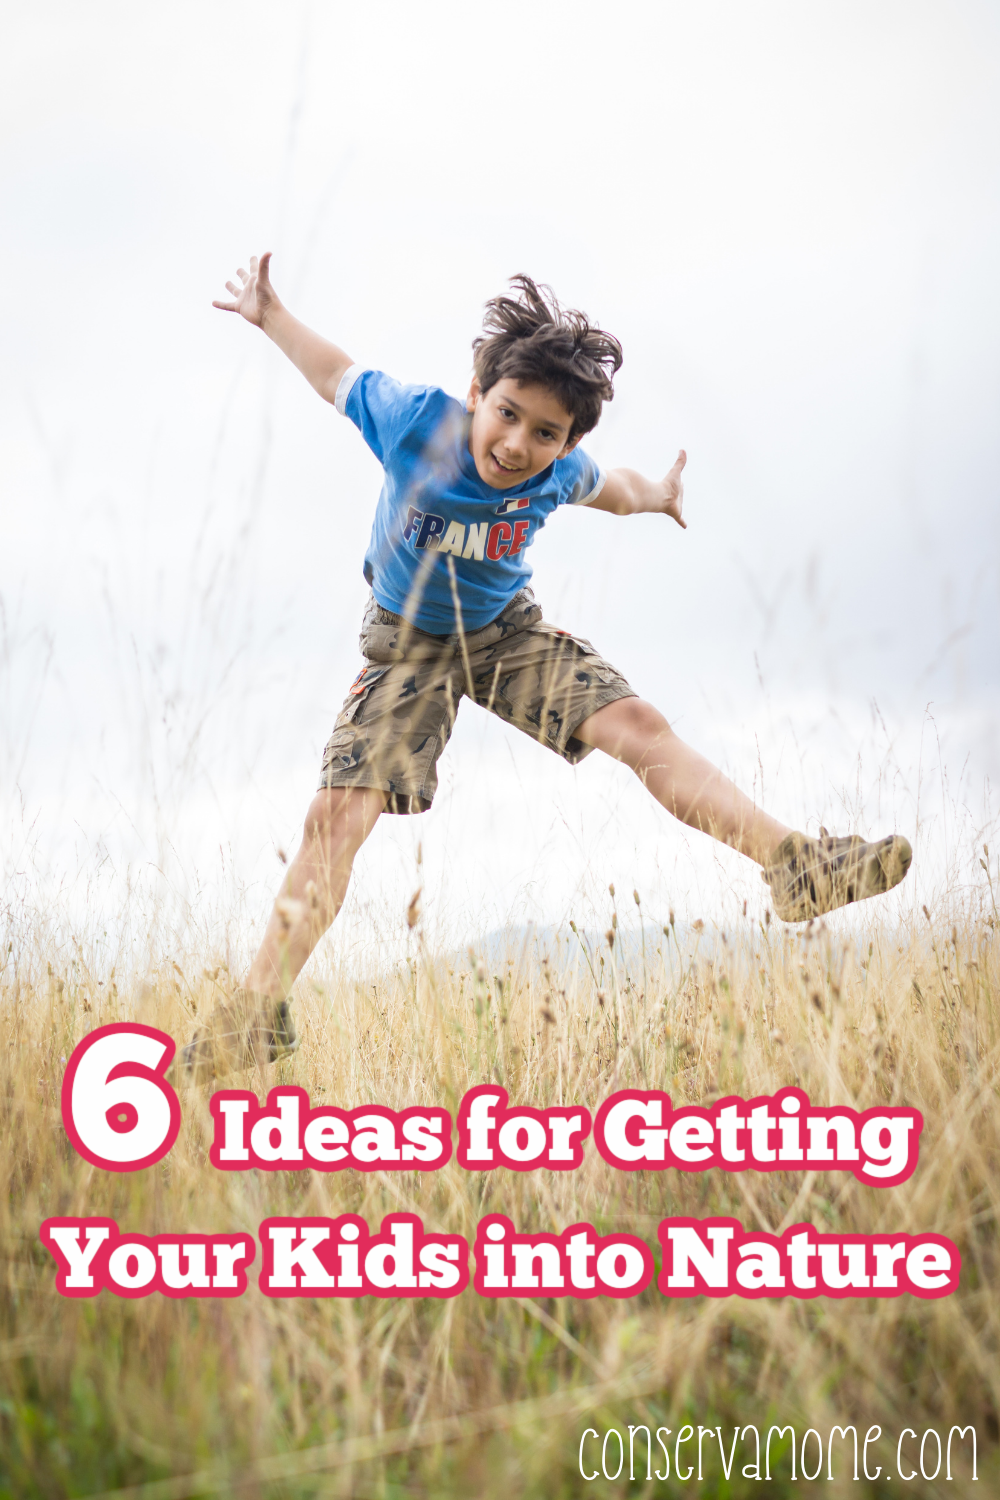 6 Ideas for Getting Your Kids into Nature